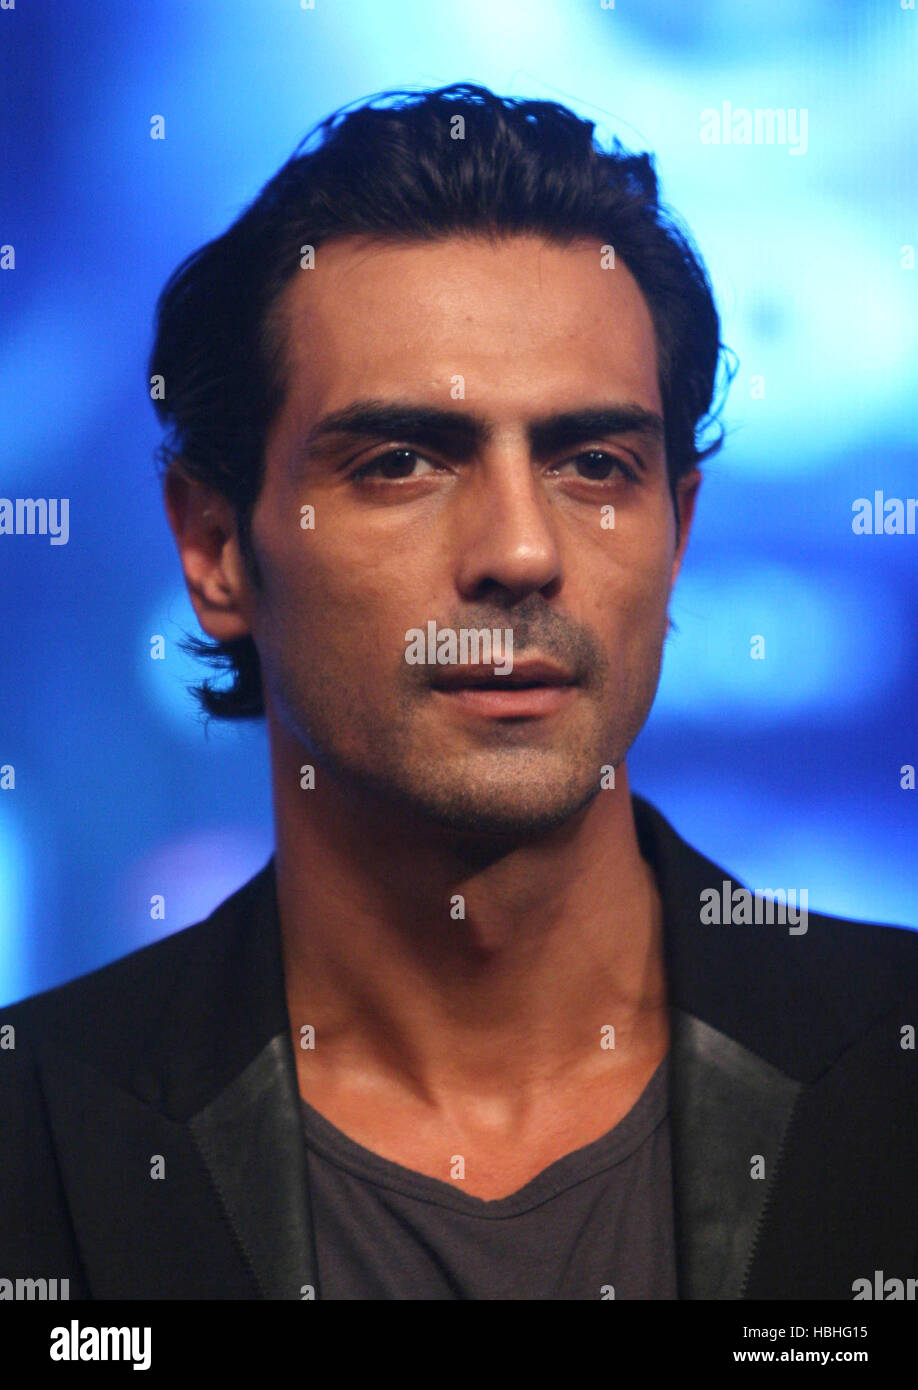 Arjun Rampal, Indian Bollywood film actor portrait at a press conference for his latest movie Ra.One at Film City in Mumbai India Stock Photo